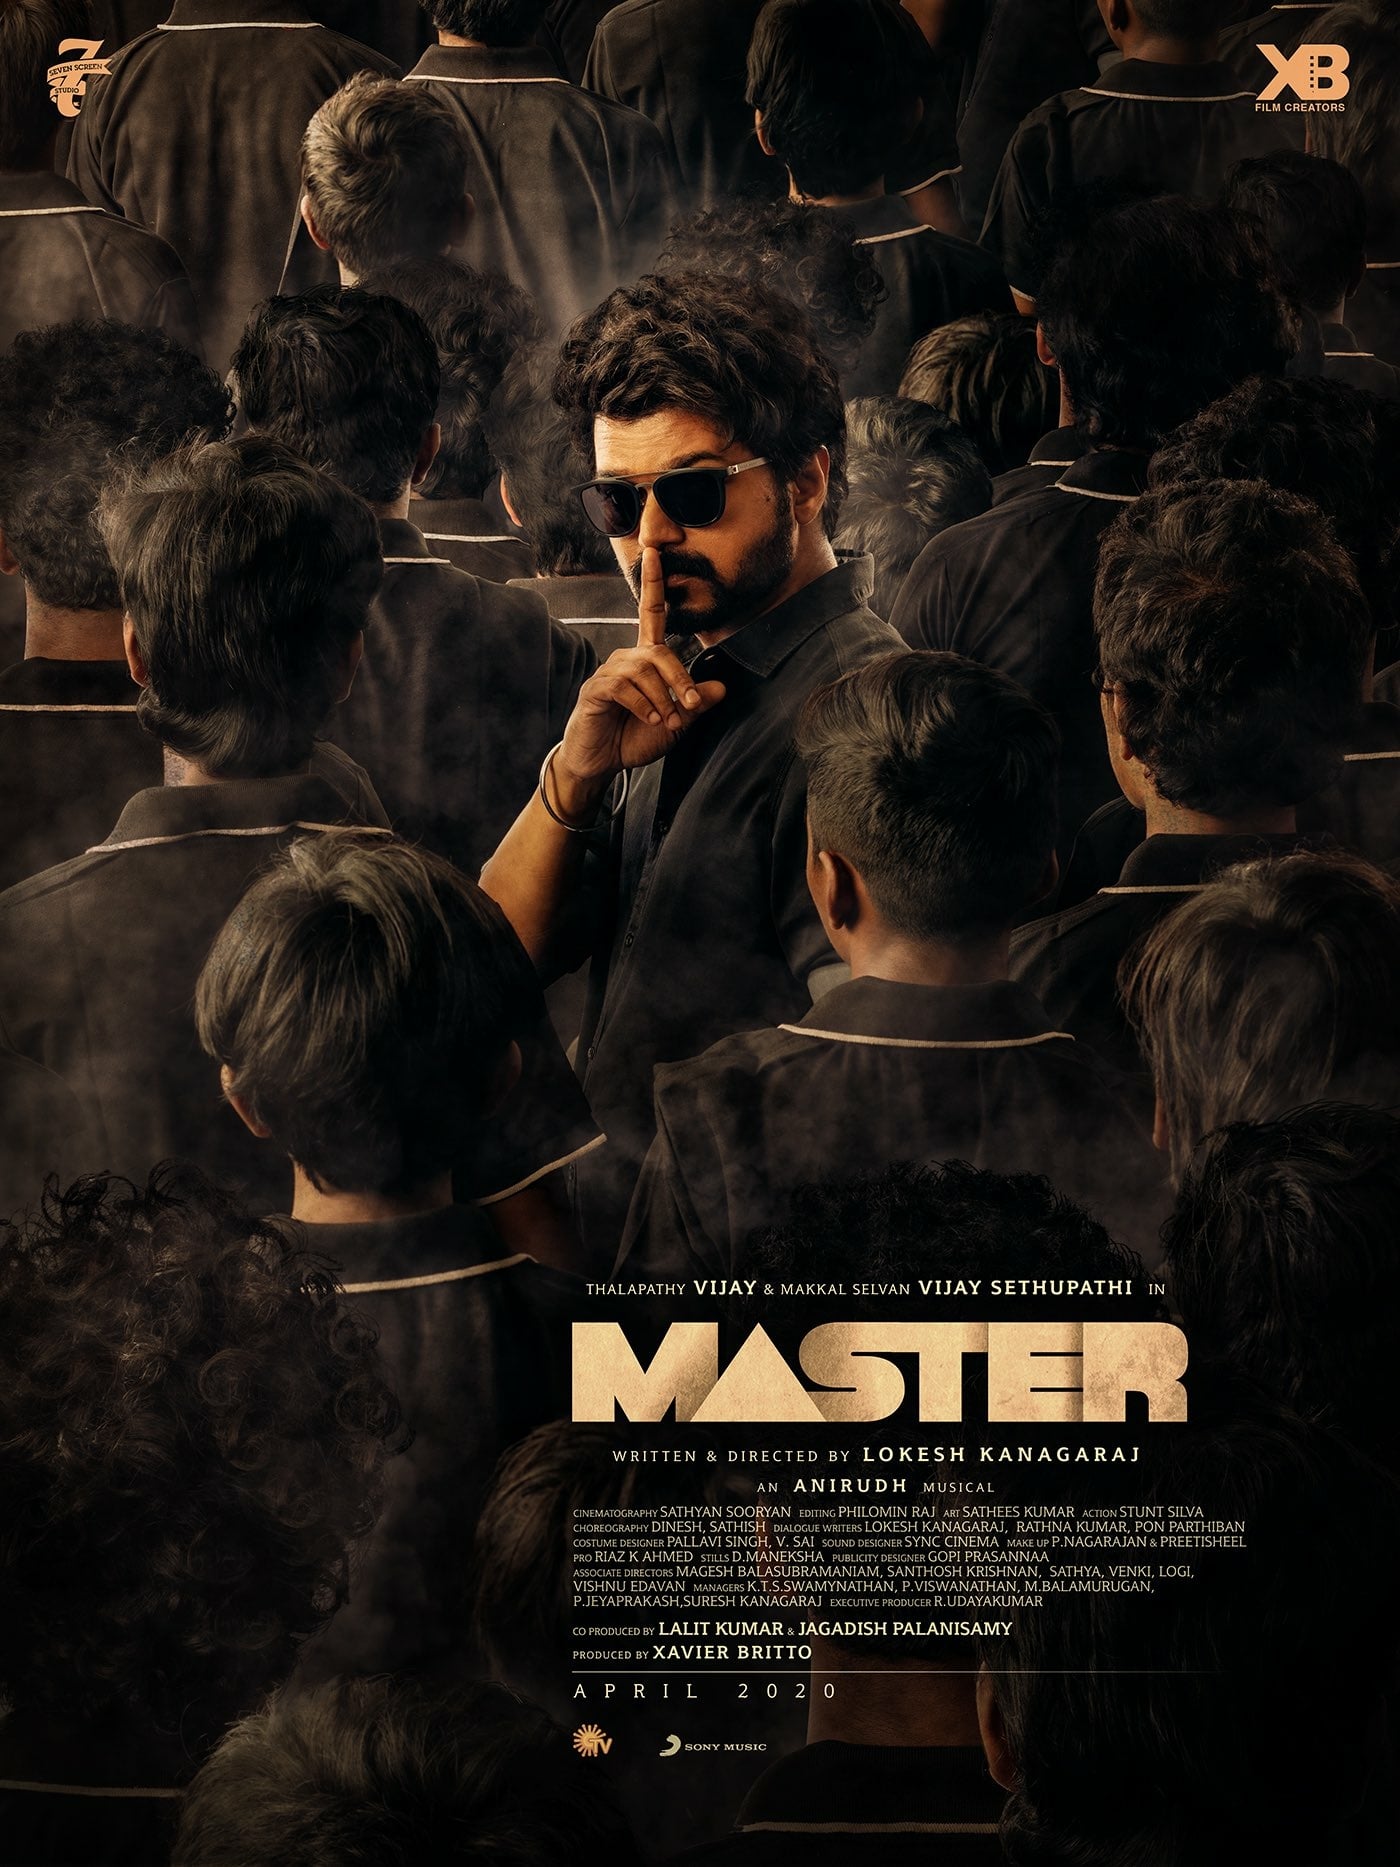 Poster for the movie "Master"